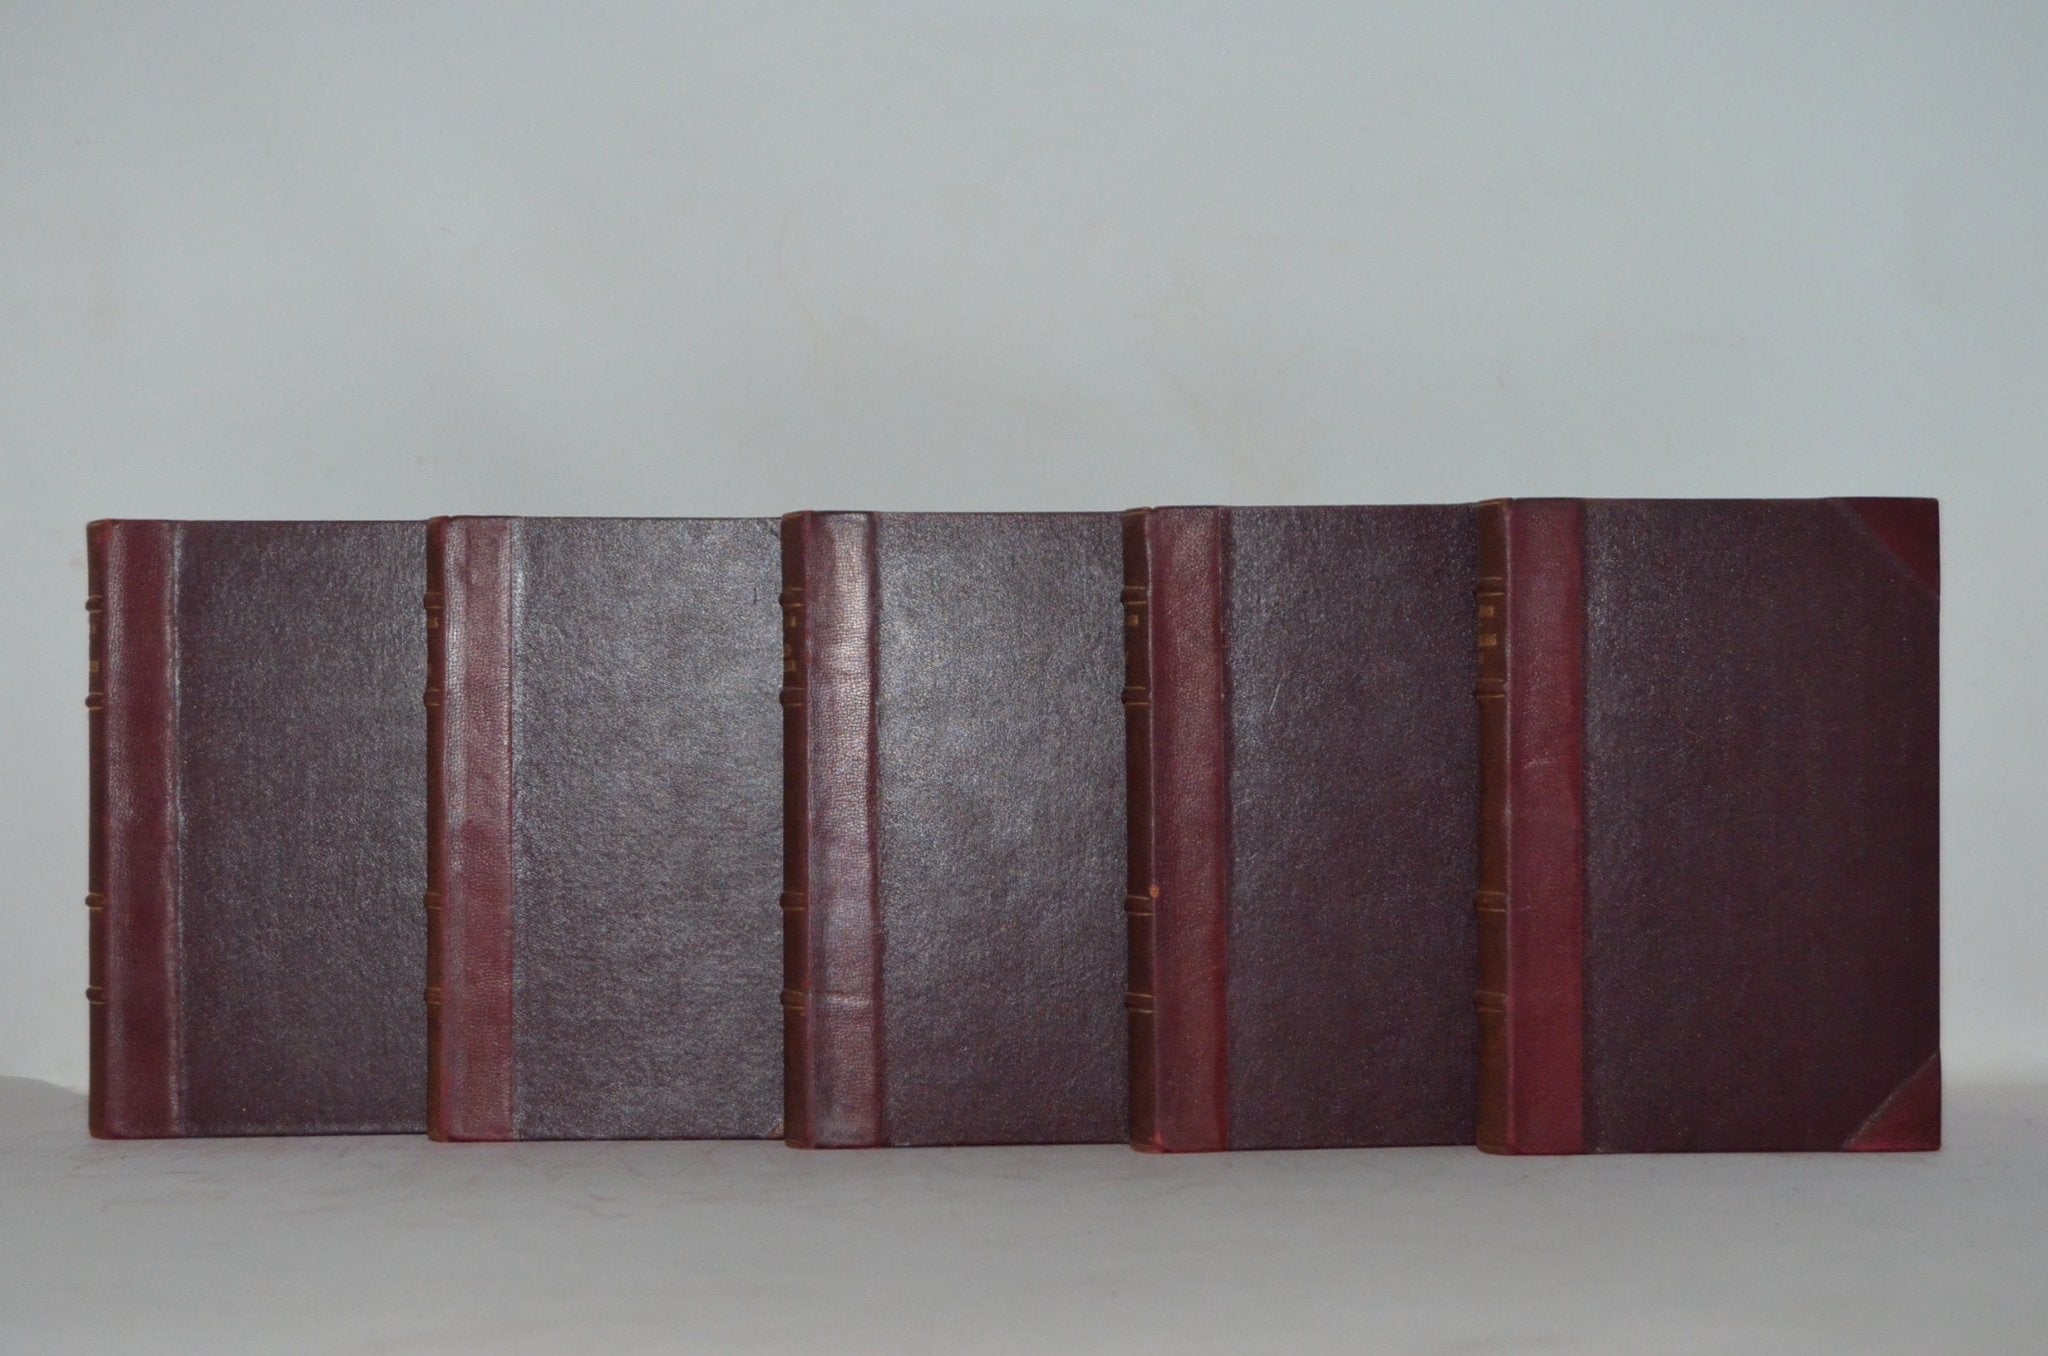 Antique Leather Bound Book Décor – Brown & Maroon Works of Jack London – Swedish - Brookfield Books